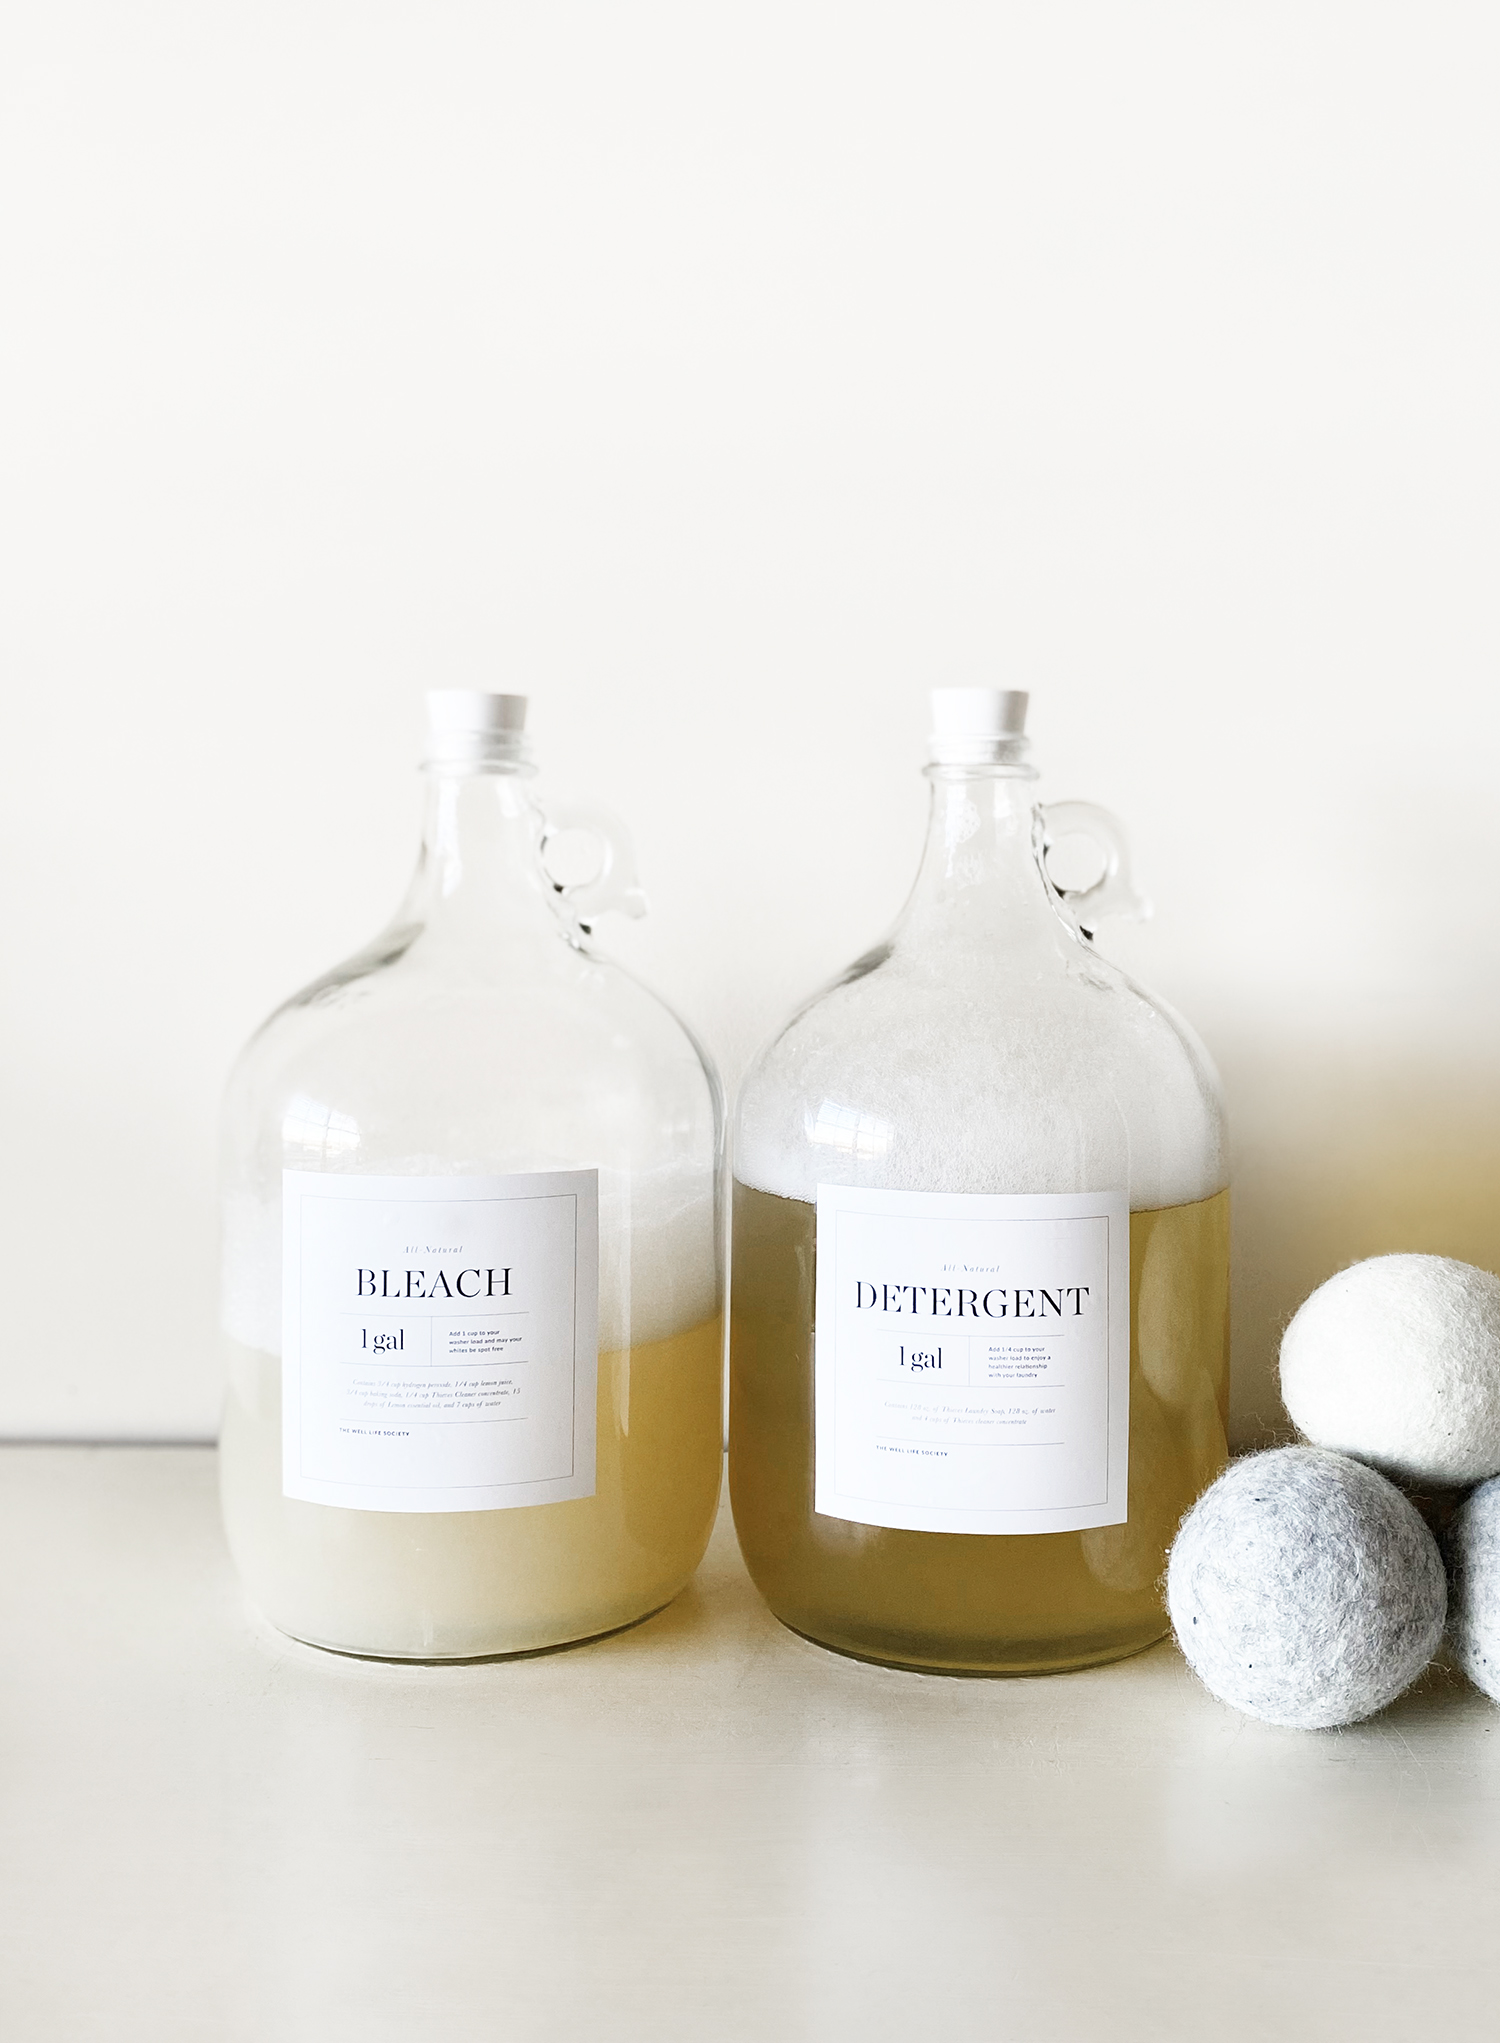 My all-natural laundry detergent and bleach recipes. Catch it all over at KaraLayne.com along with a printable download!